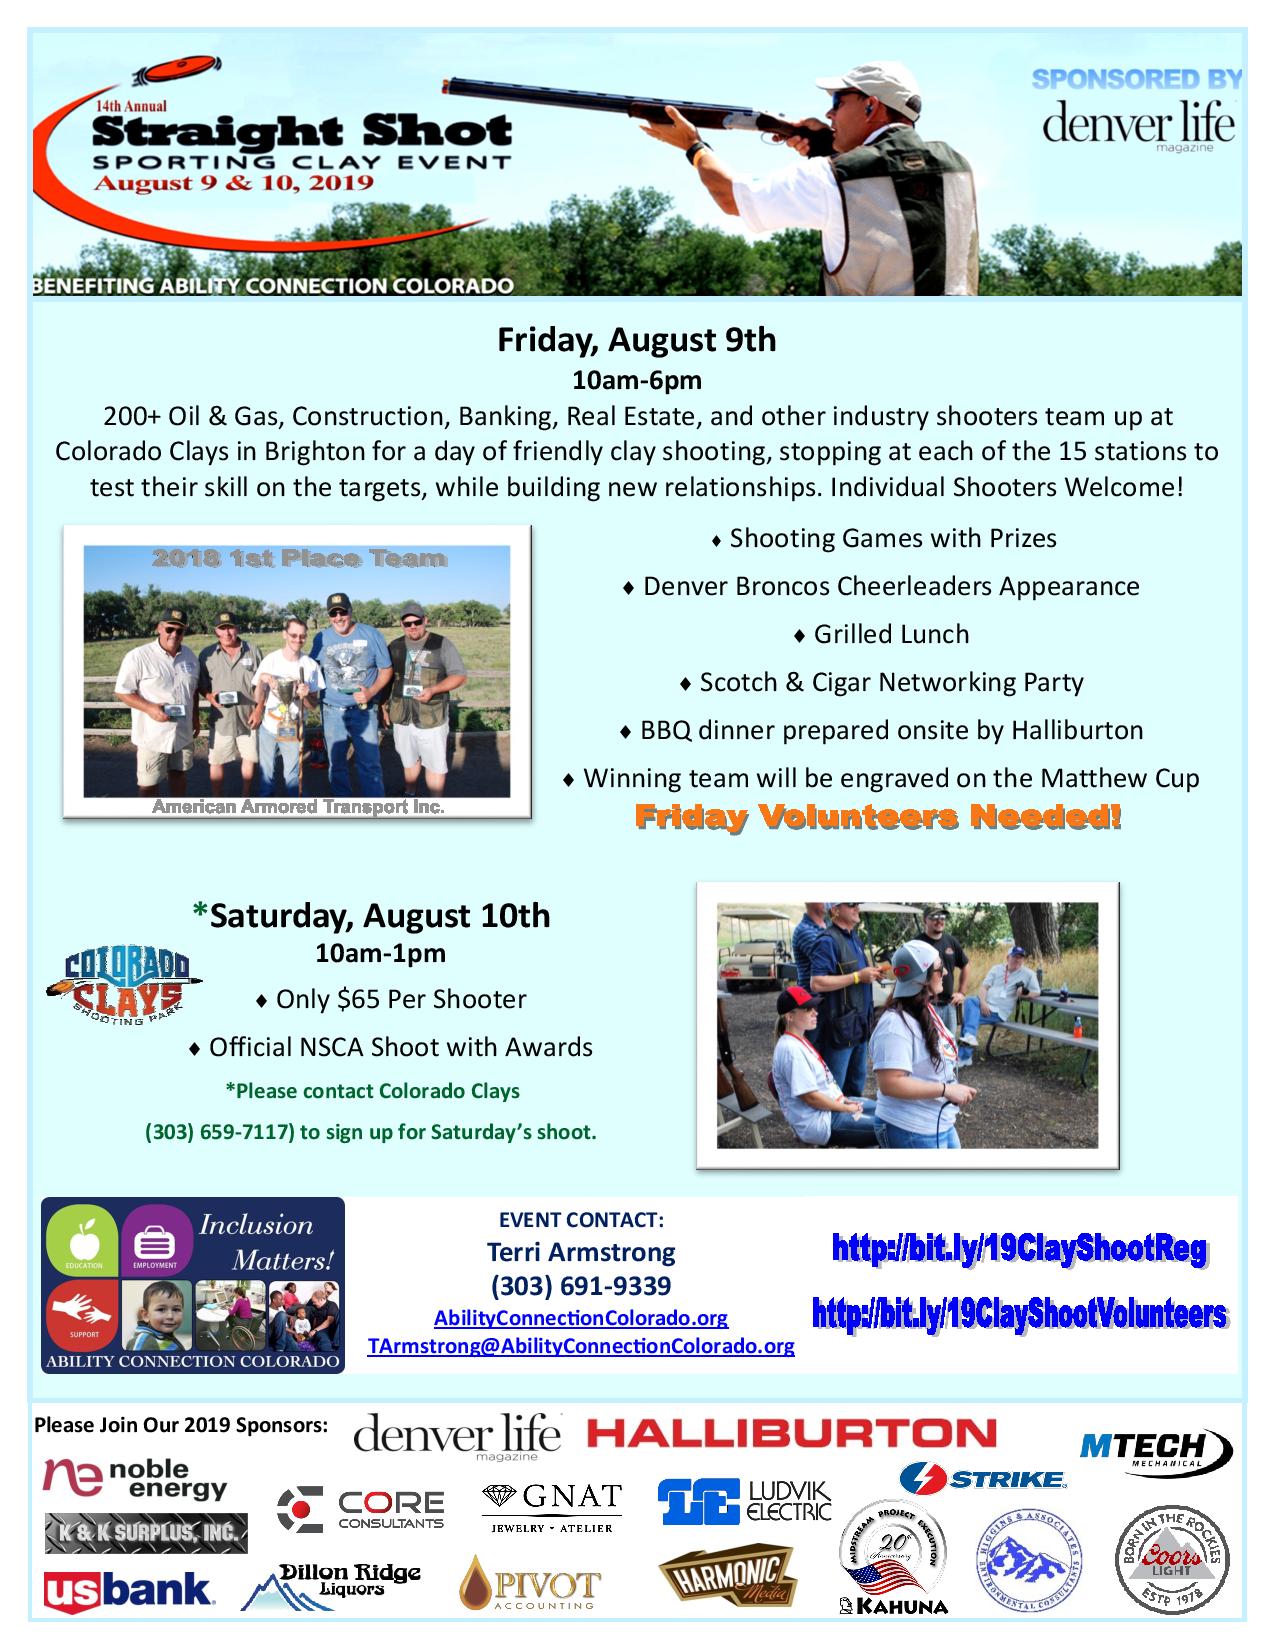 14th Annual Ability Connection Colorado Straight Shot Sporting Clays Event